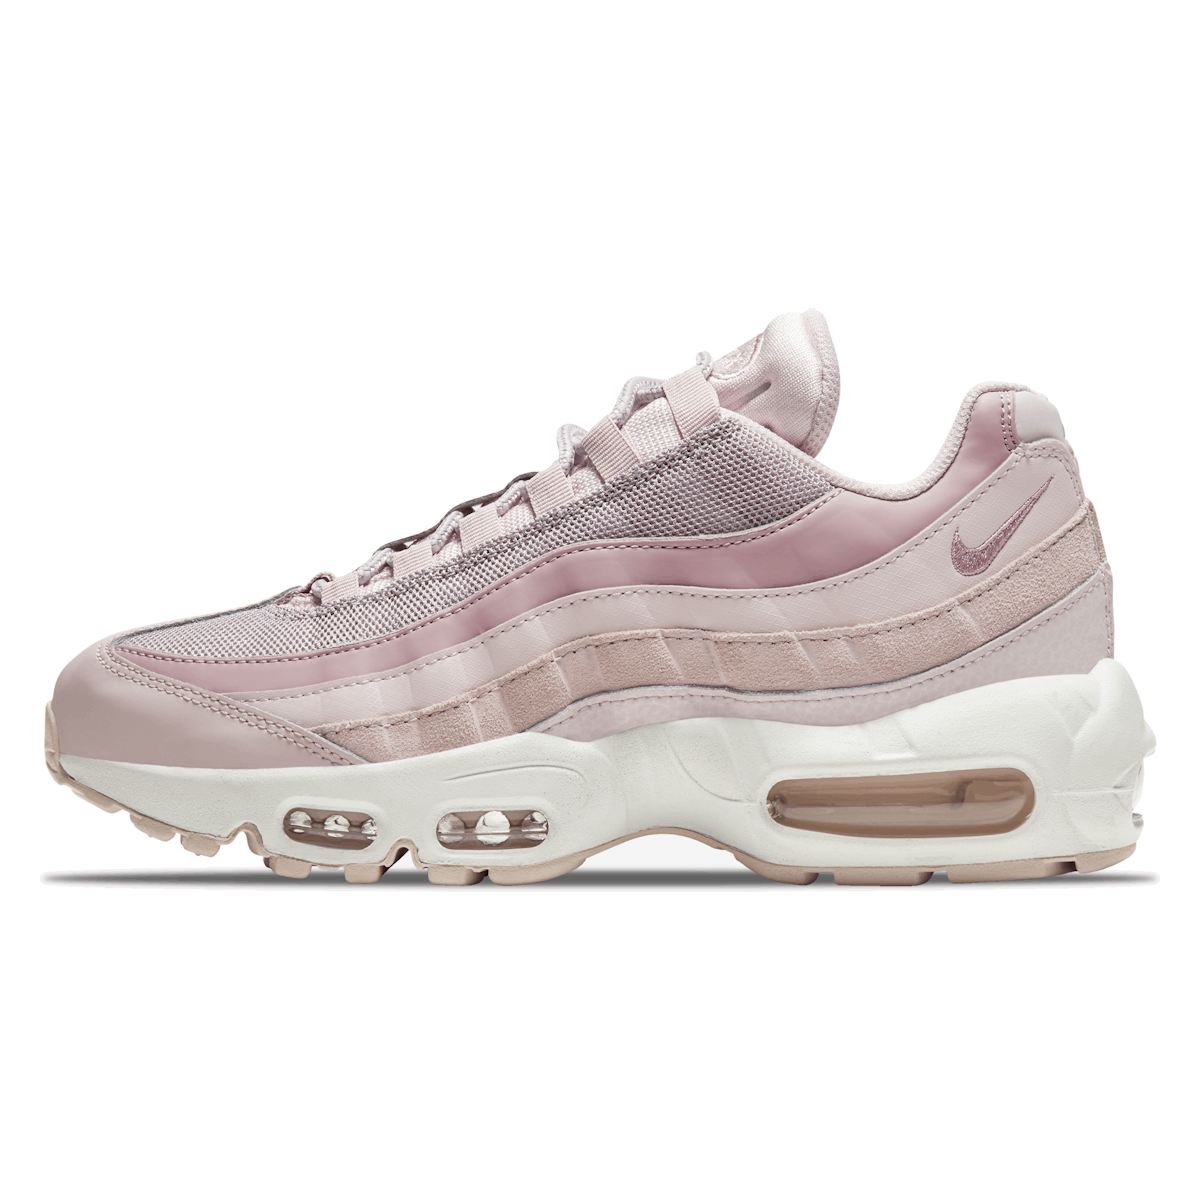 Nike WMNS Air Max 90 Barely Rose